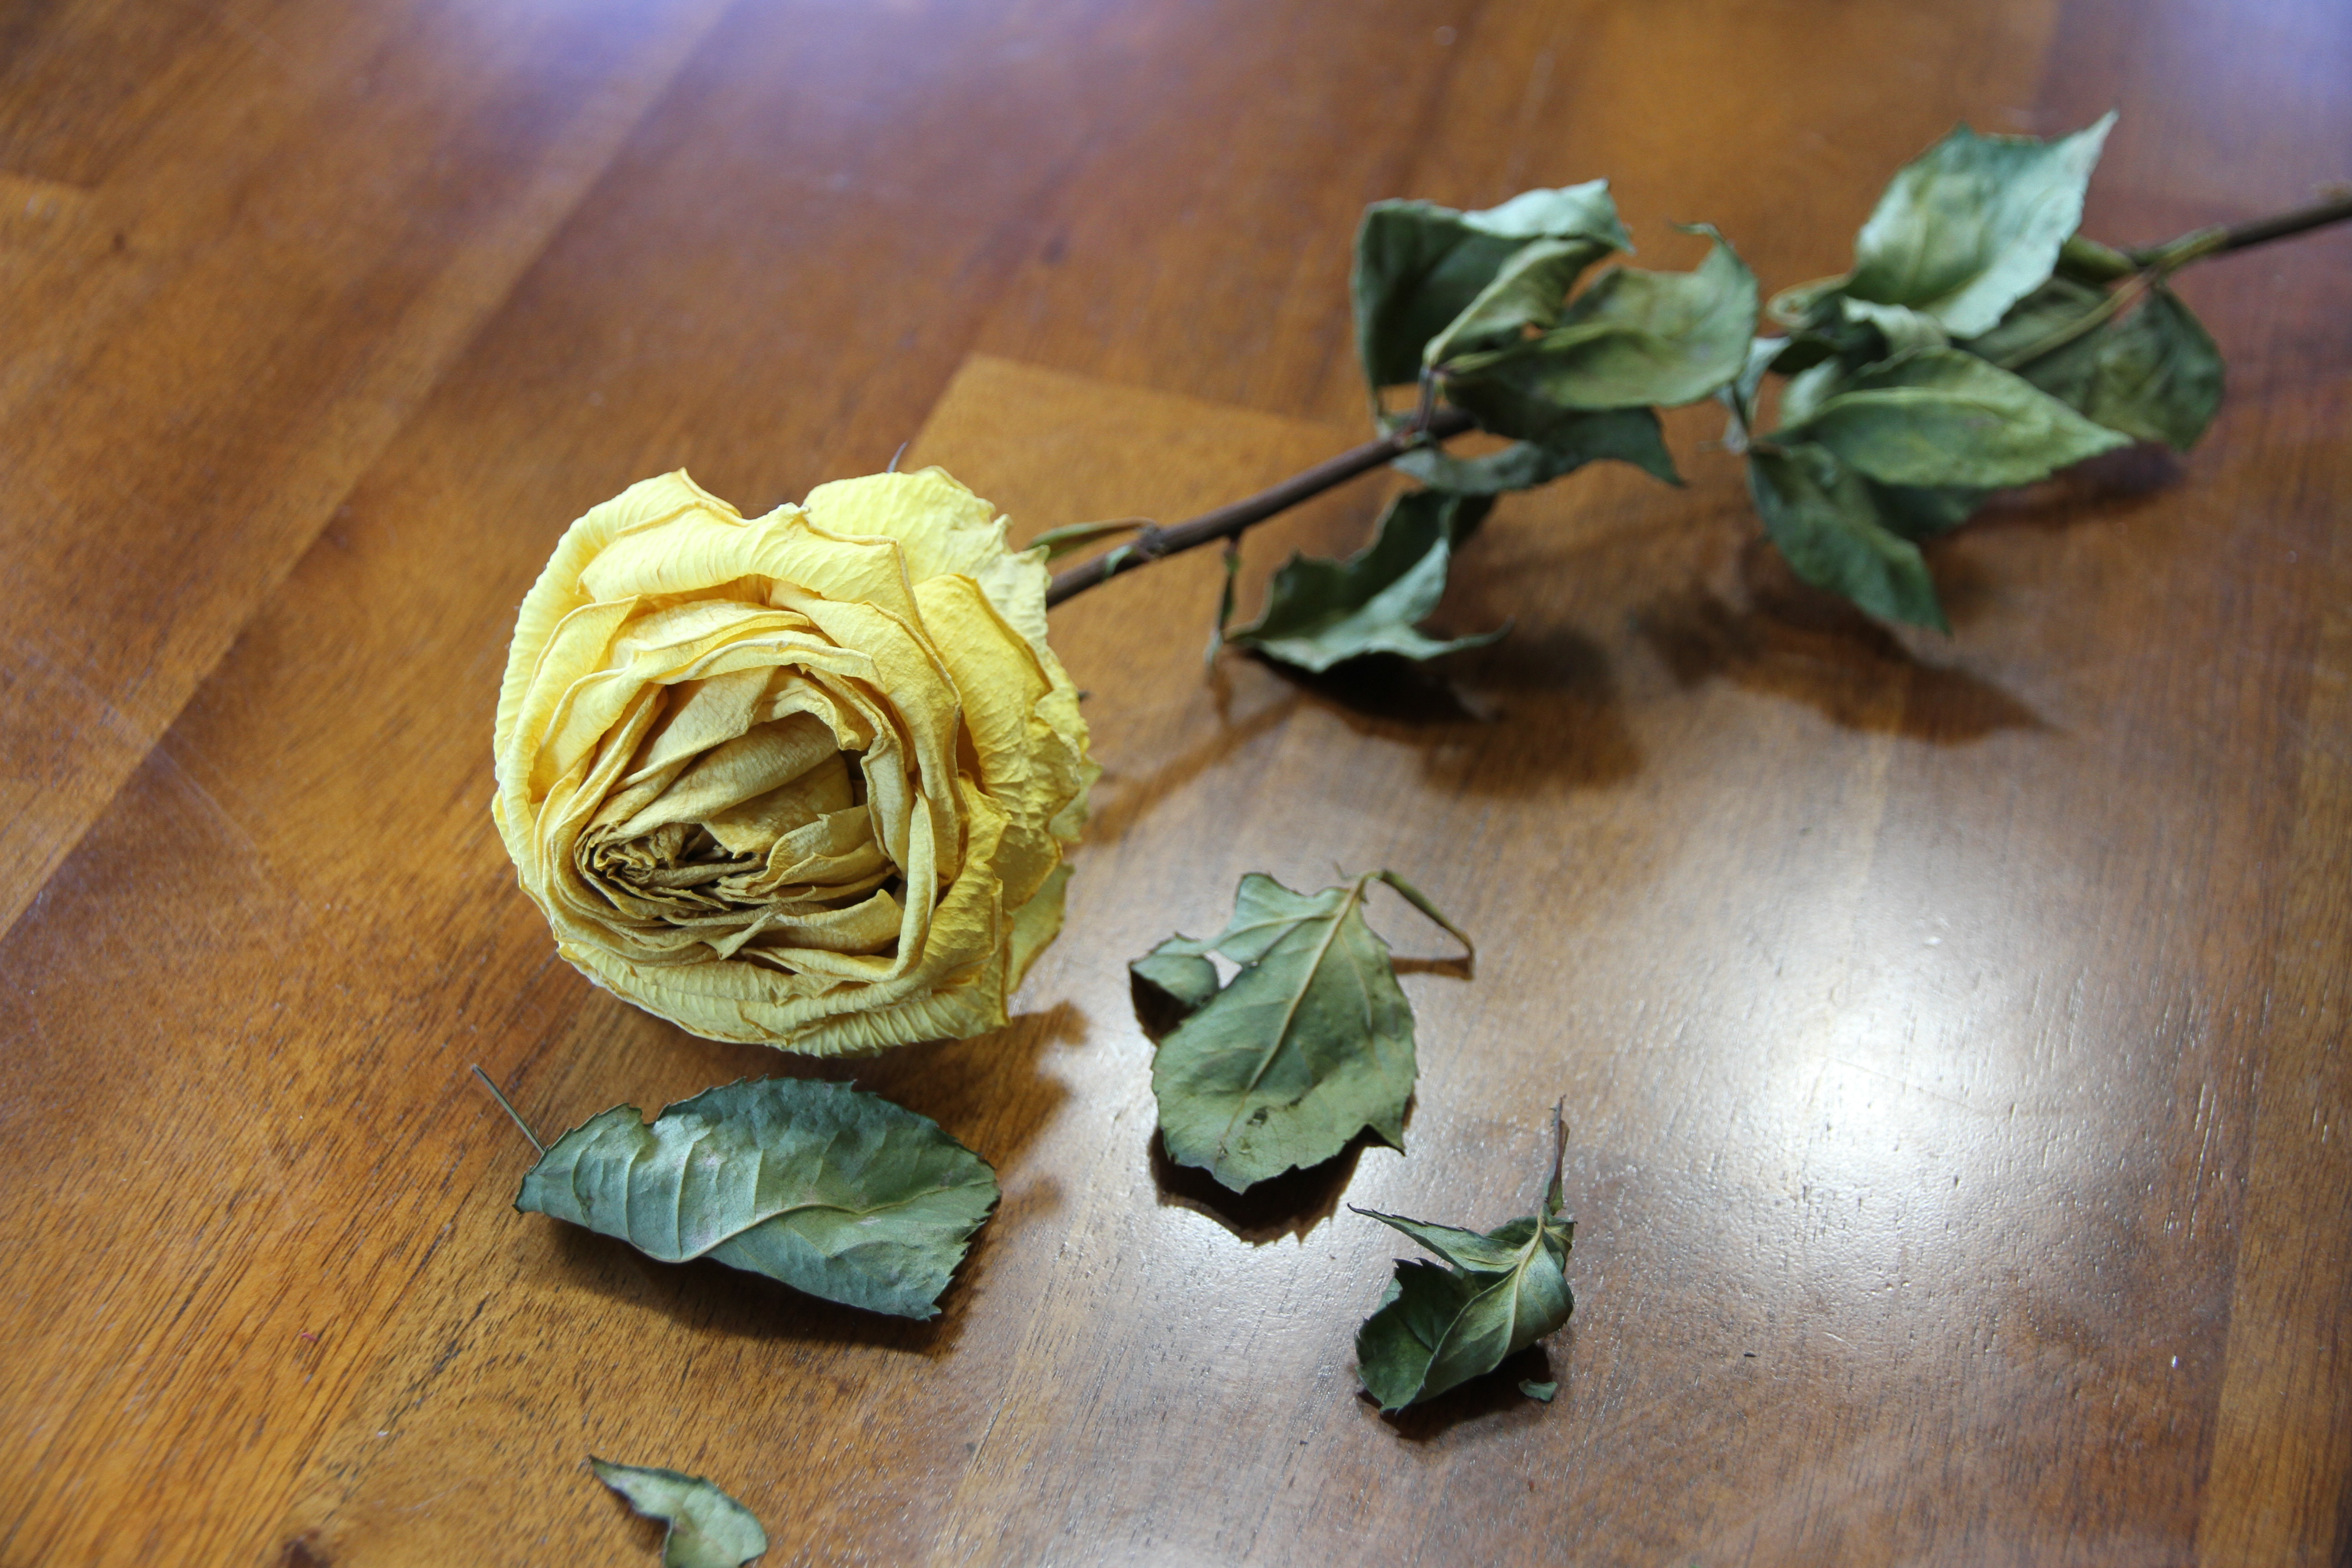 yellow rose, dried, and dried up leaves